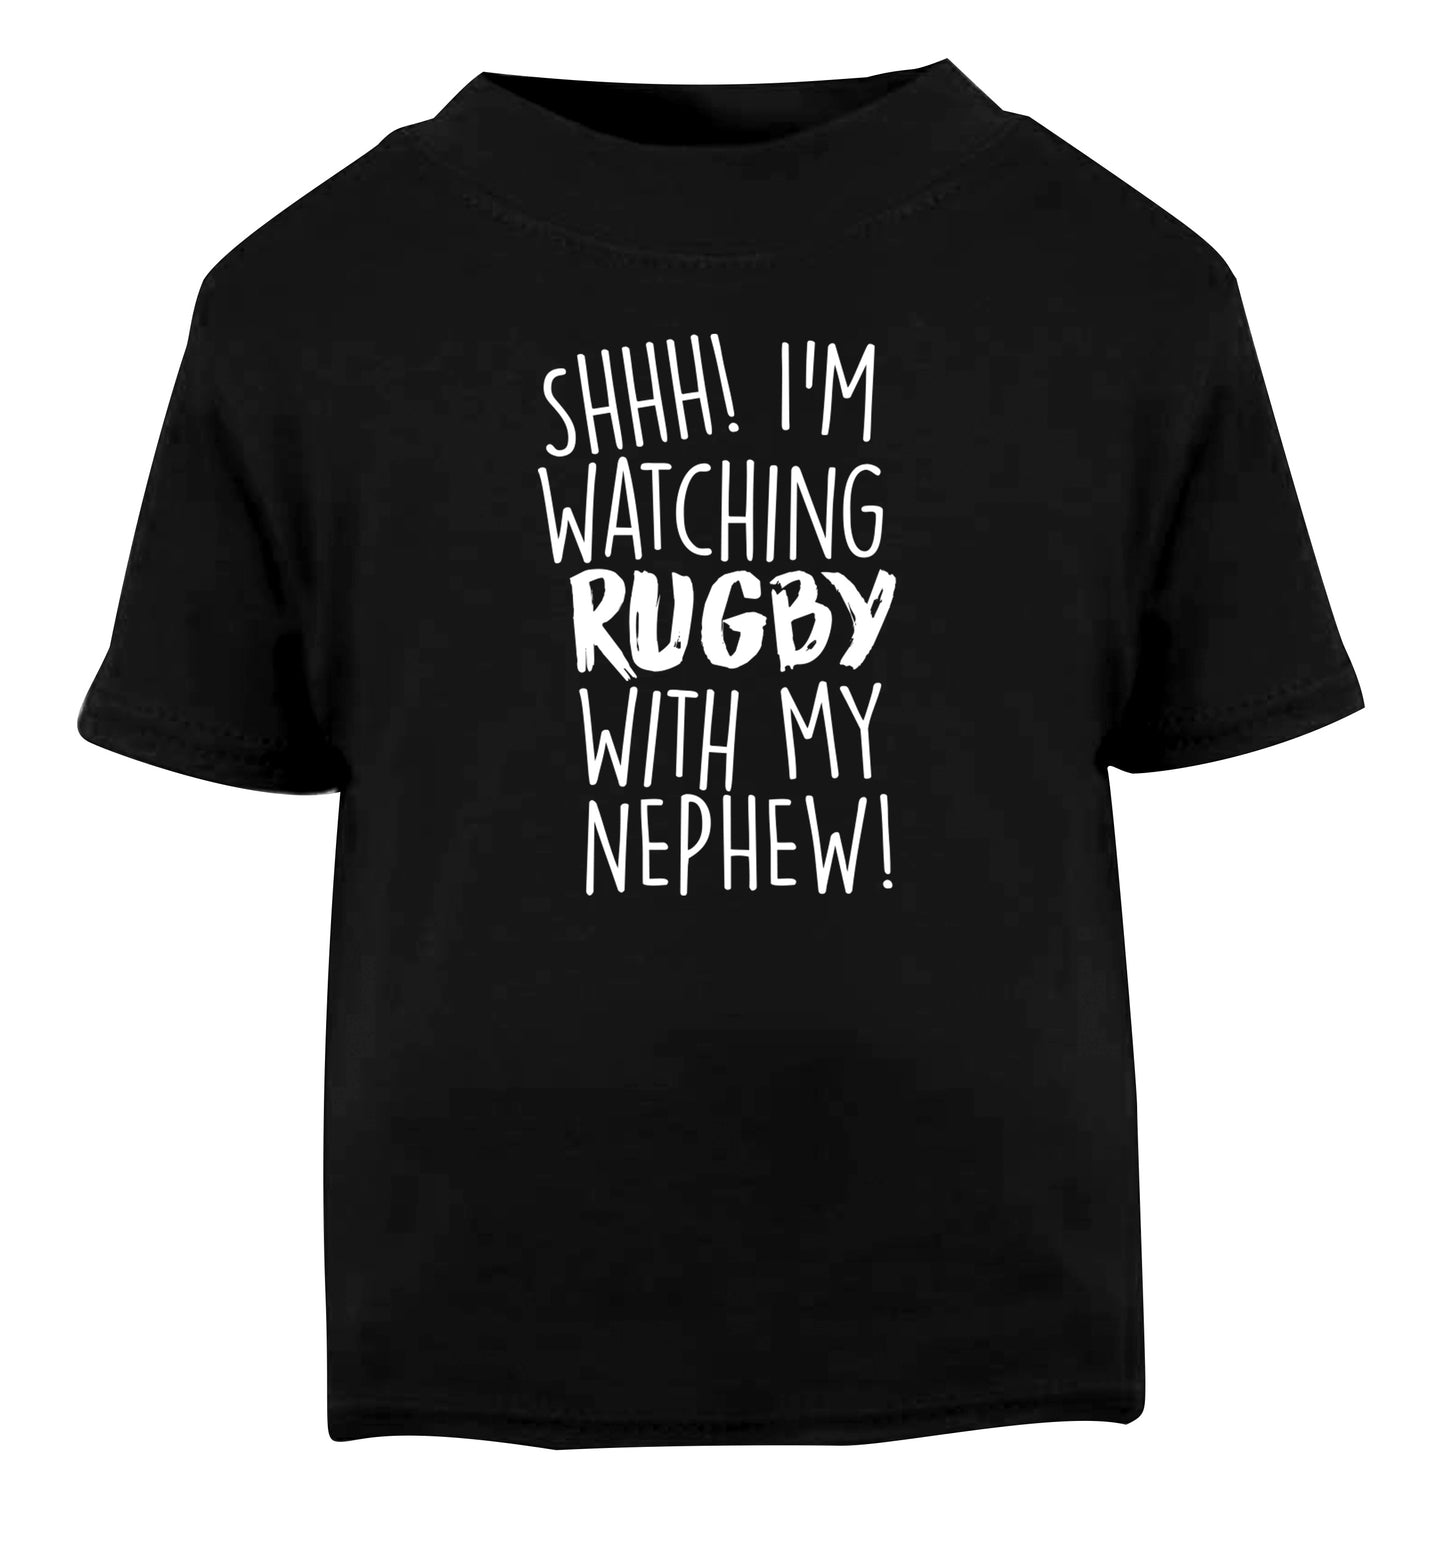 Shh.. I'm watching rugby with my nephew Black Baby Toddler Tshirt 2 years